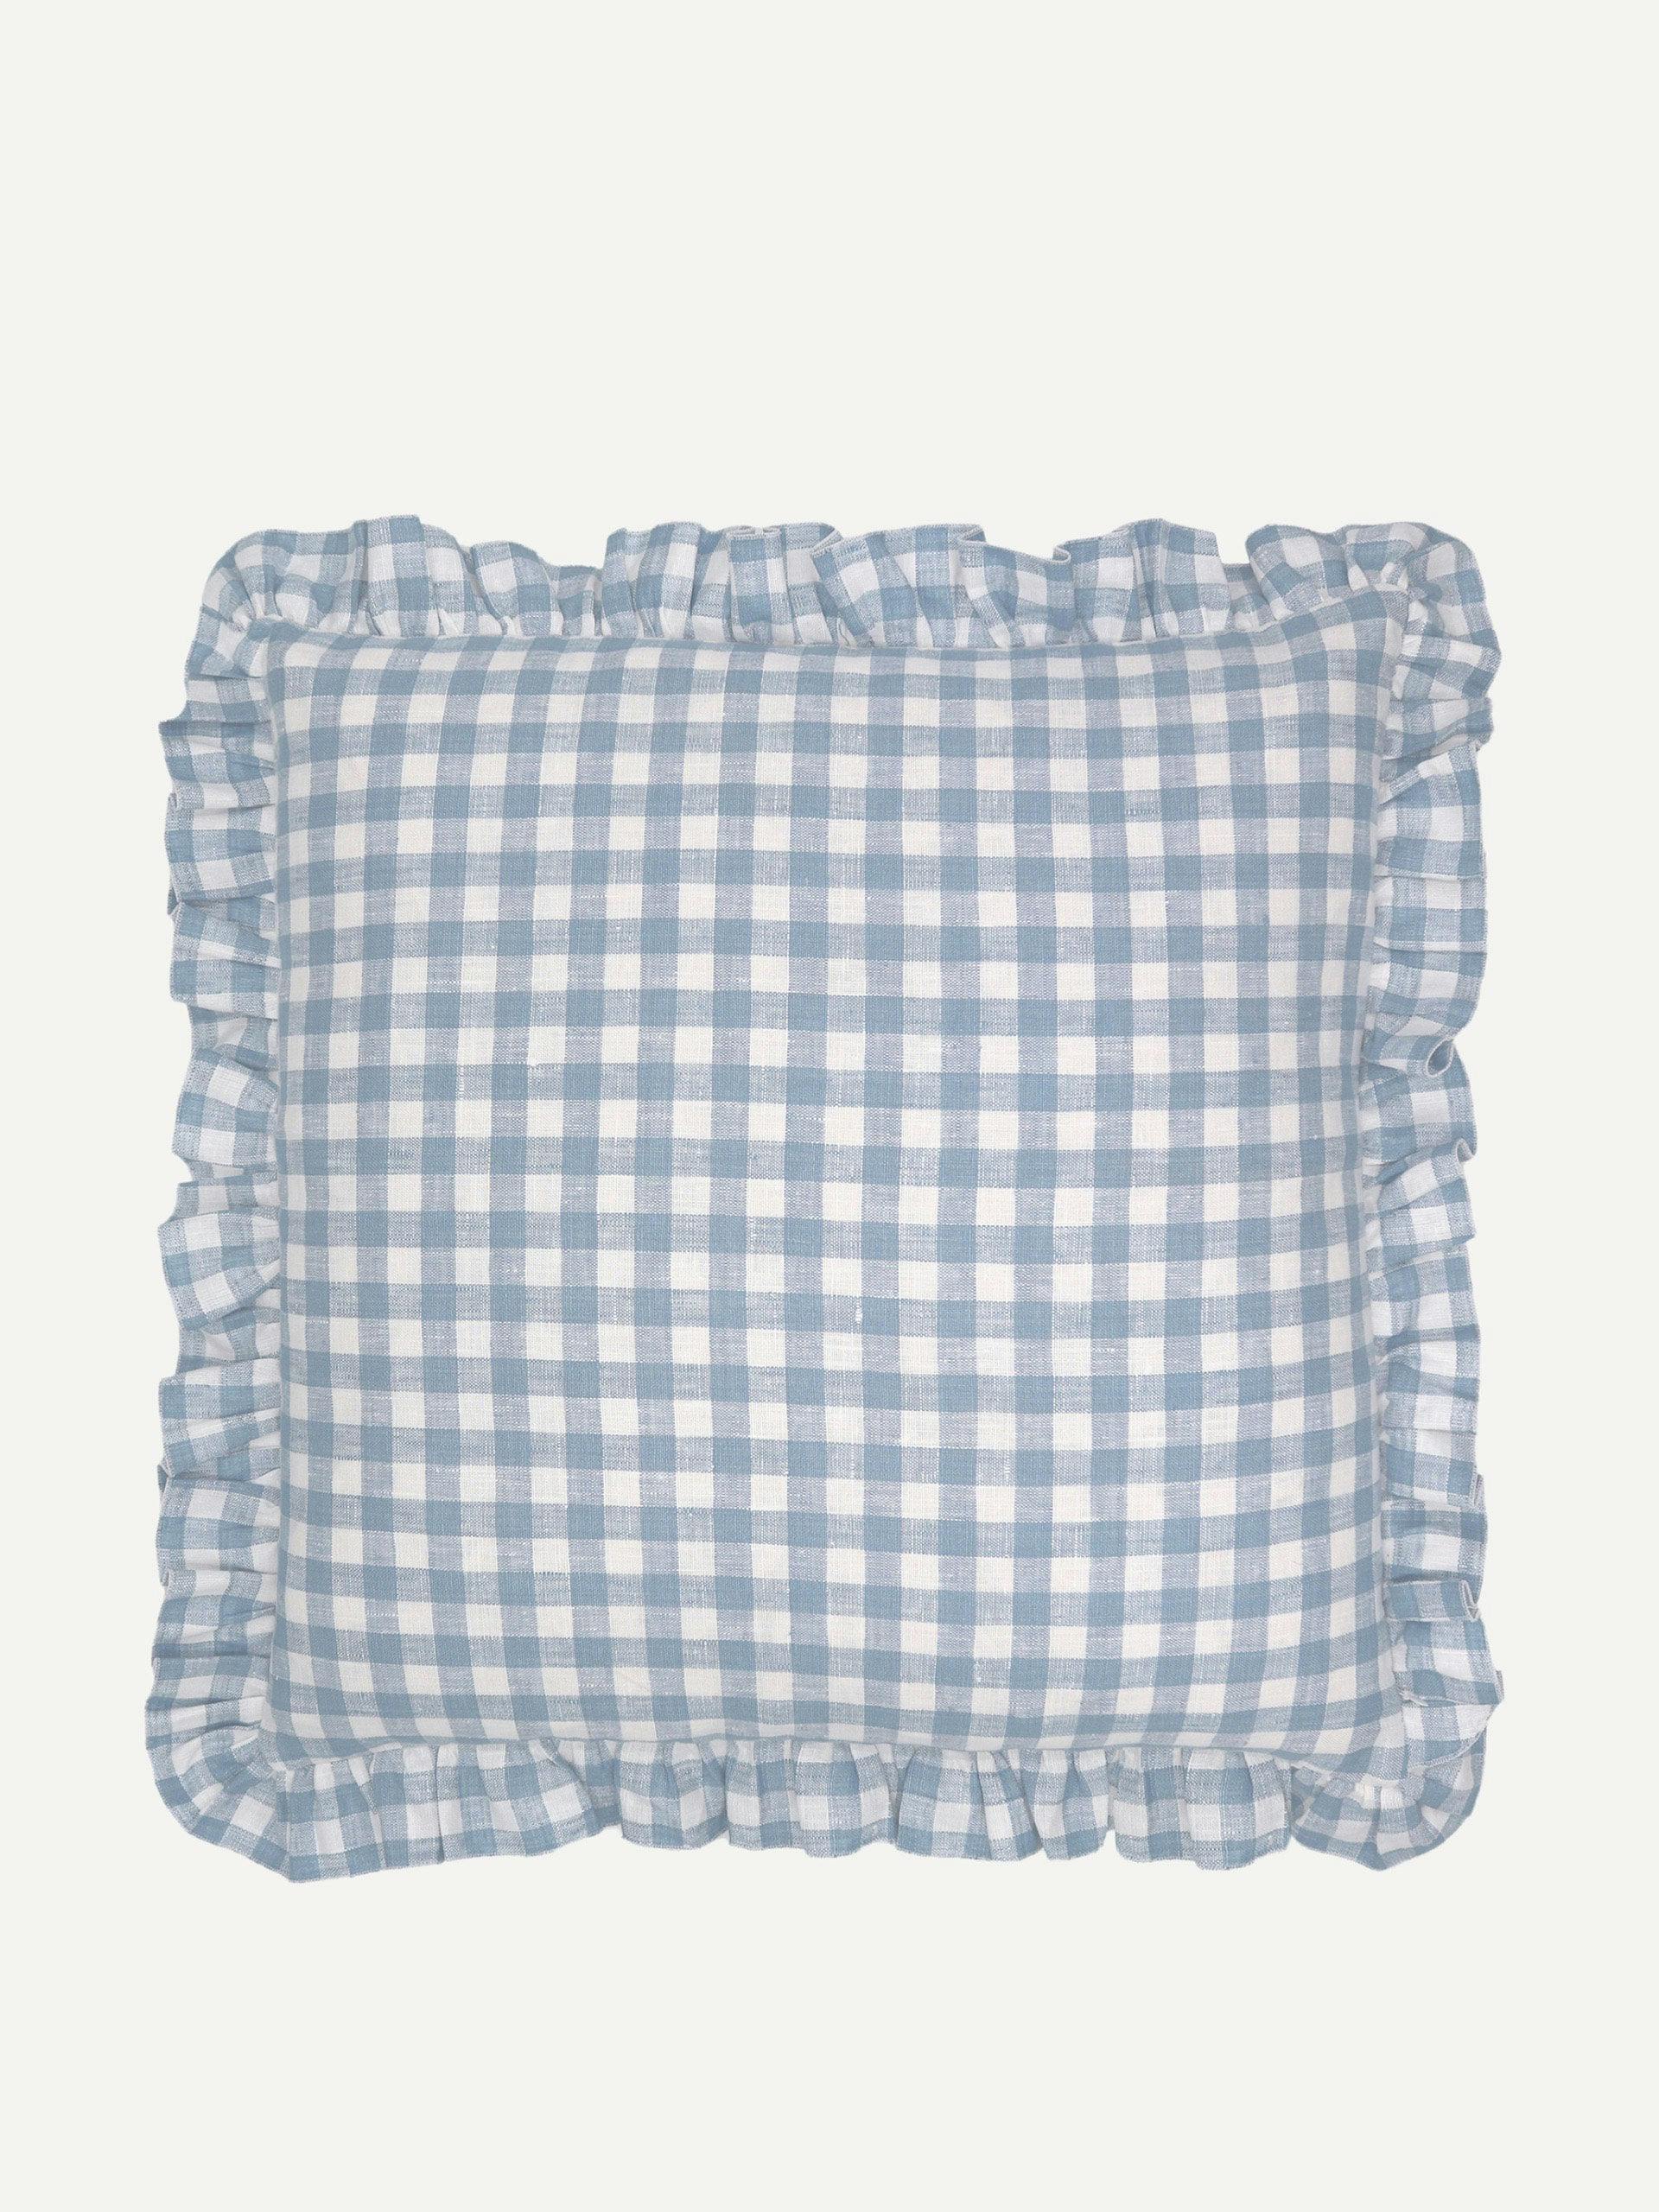 Blue ruffle gingham linen square cushion cover